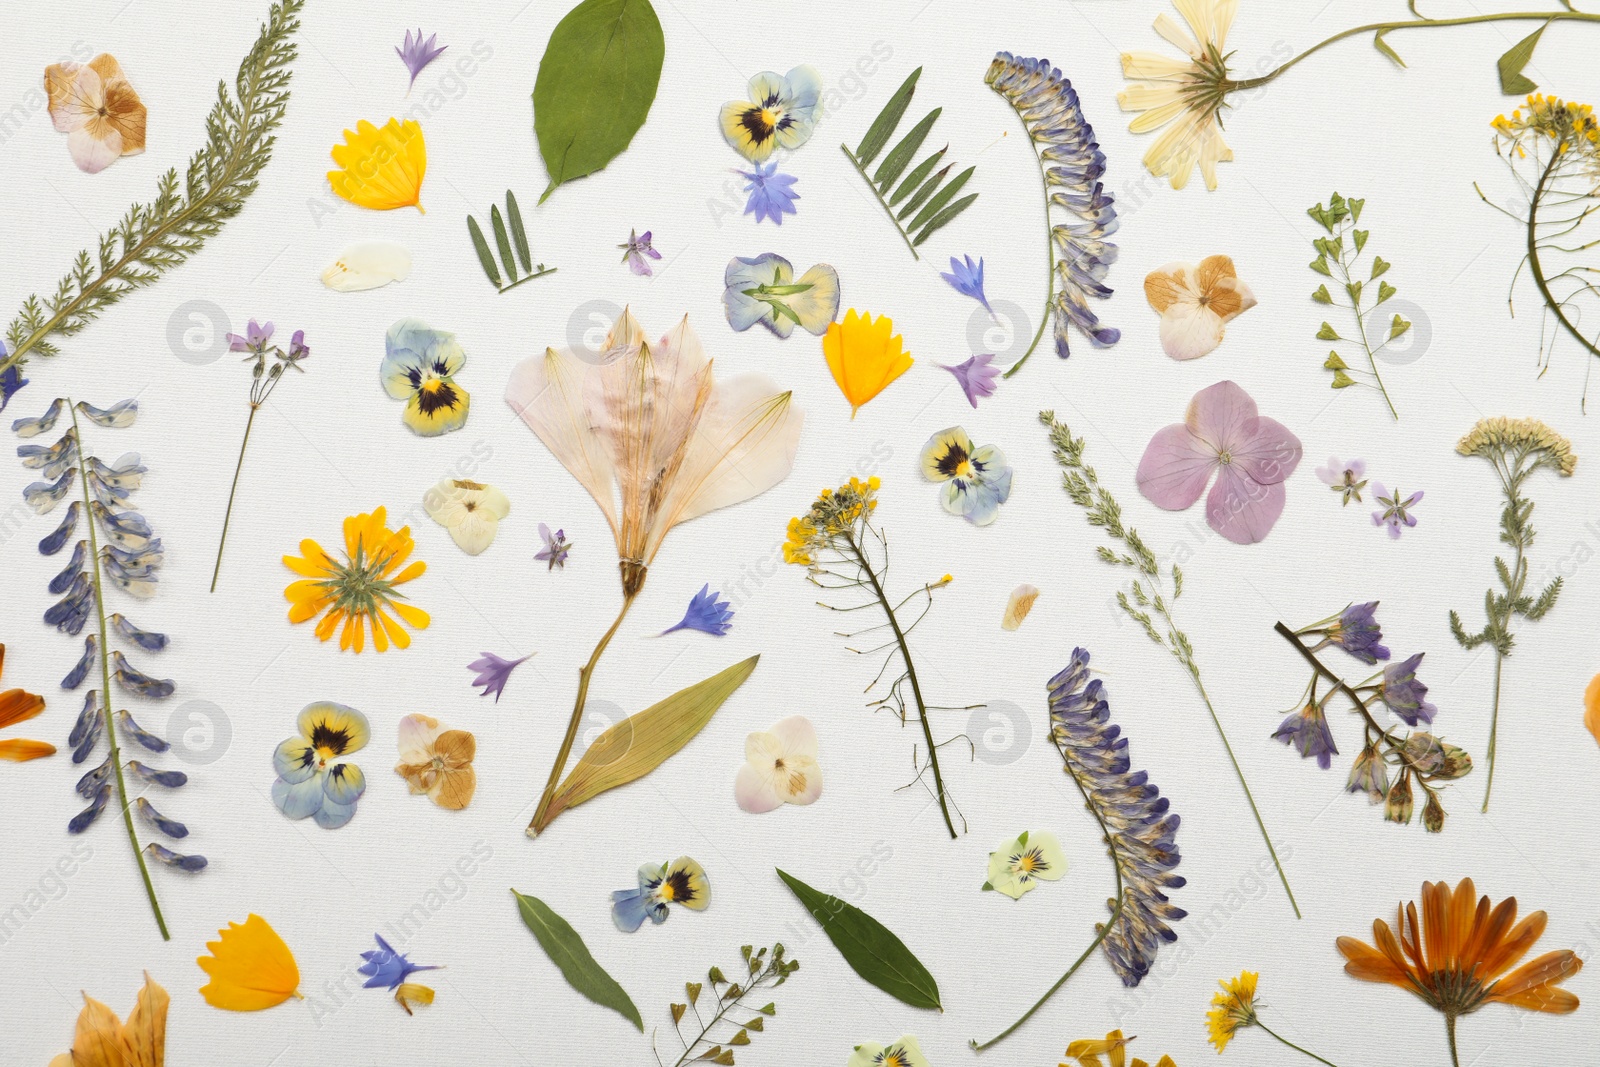 Photo of Pressed dried flowers and plants on white background, flat lay. Beautiful herbarium